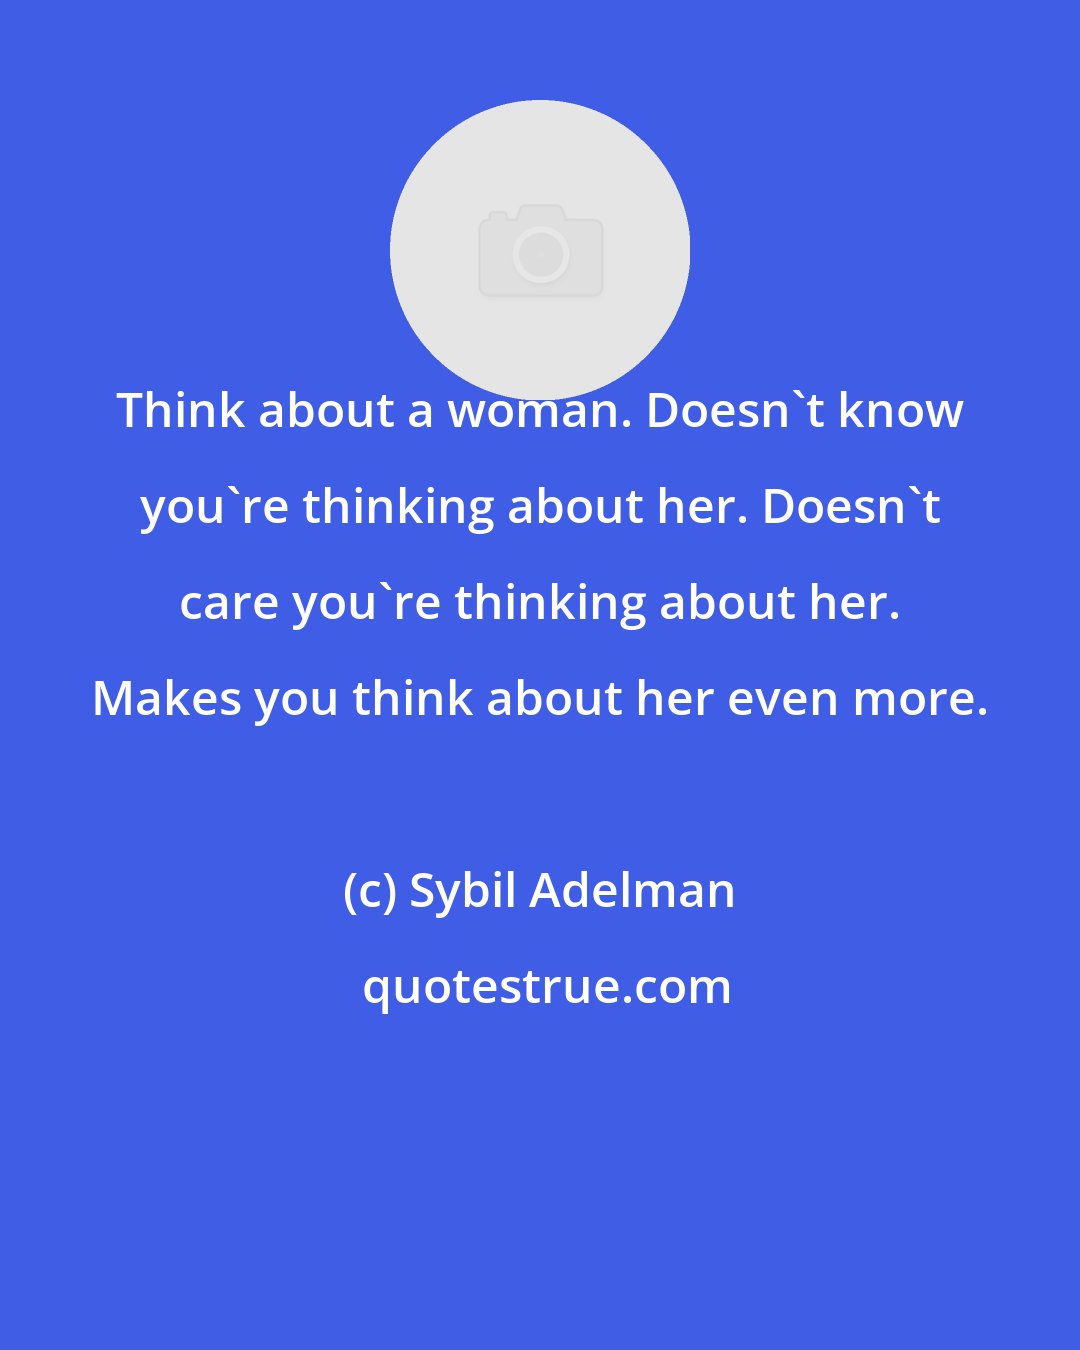 Sybil Adelman: Think about a woman. Doesn't know you're thinking about her. Doesn't care you're thinking about her. Makes you think about her even more.